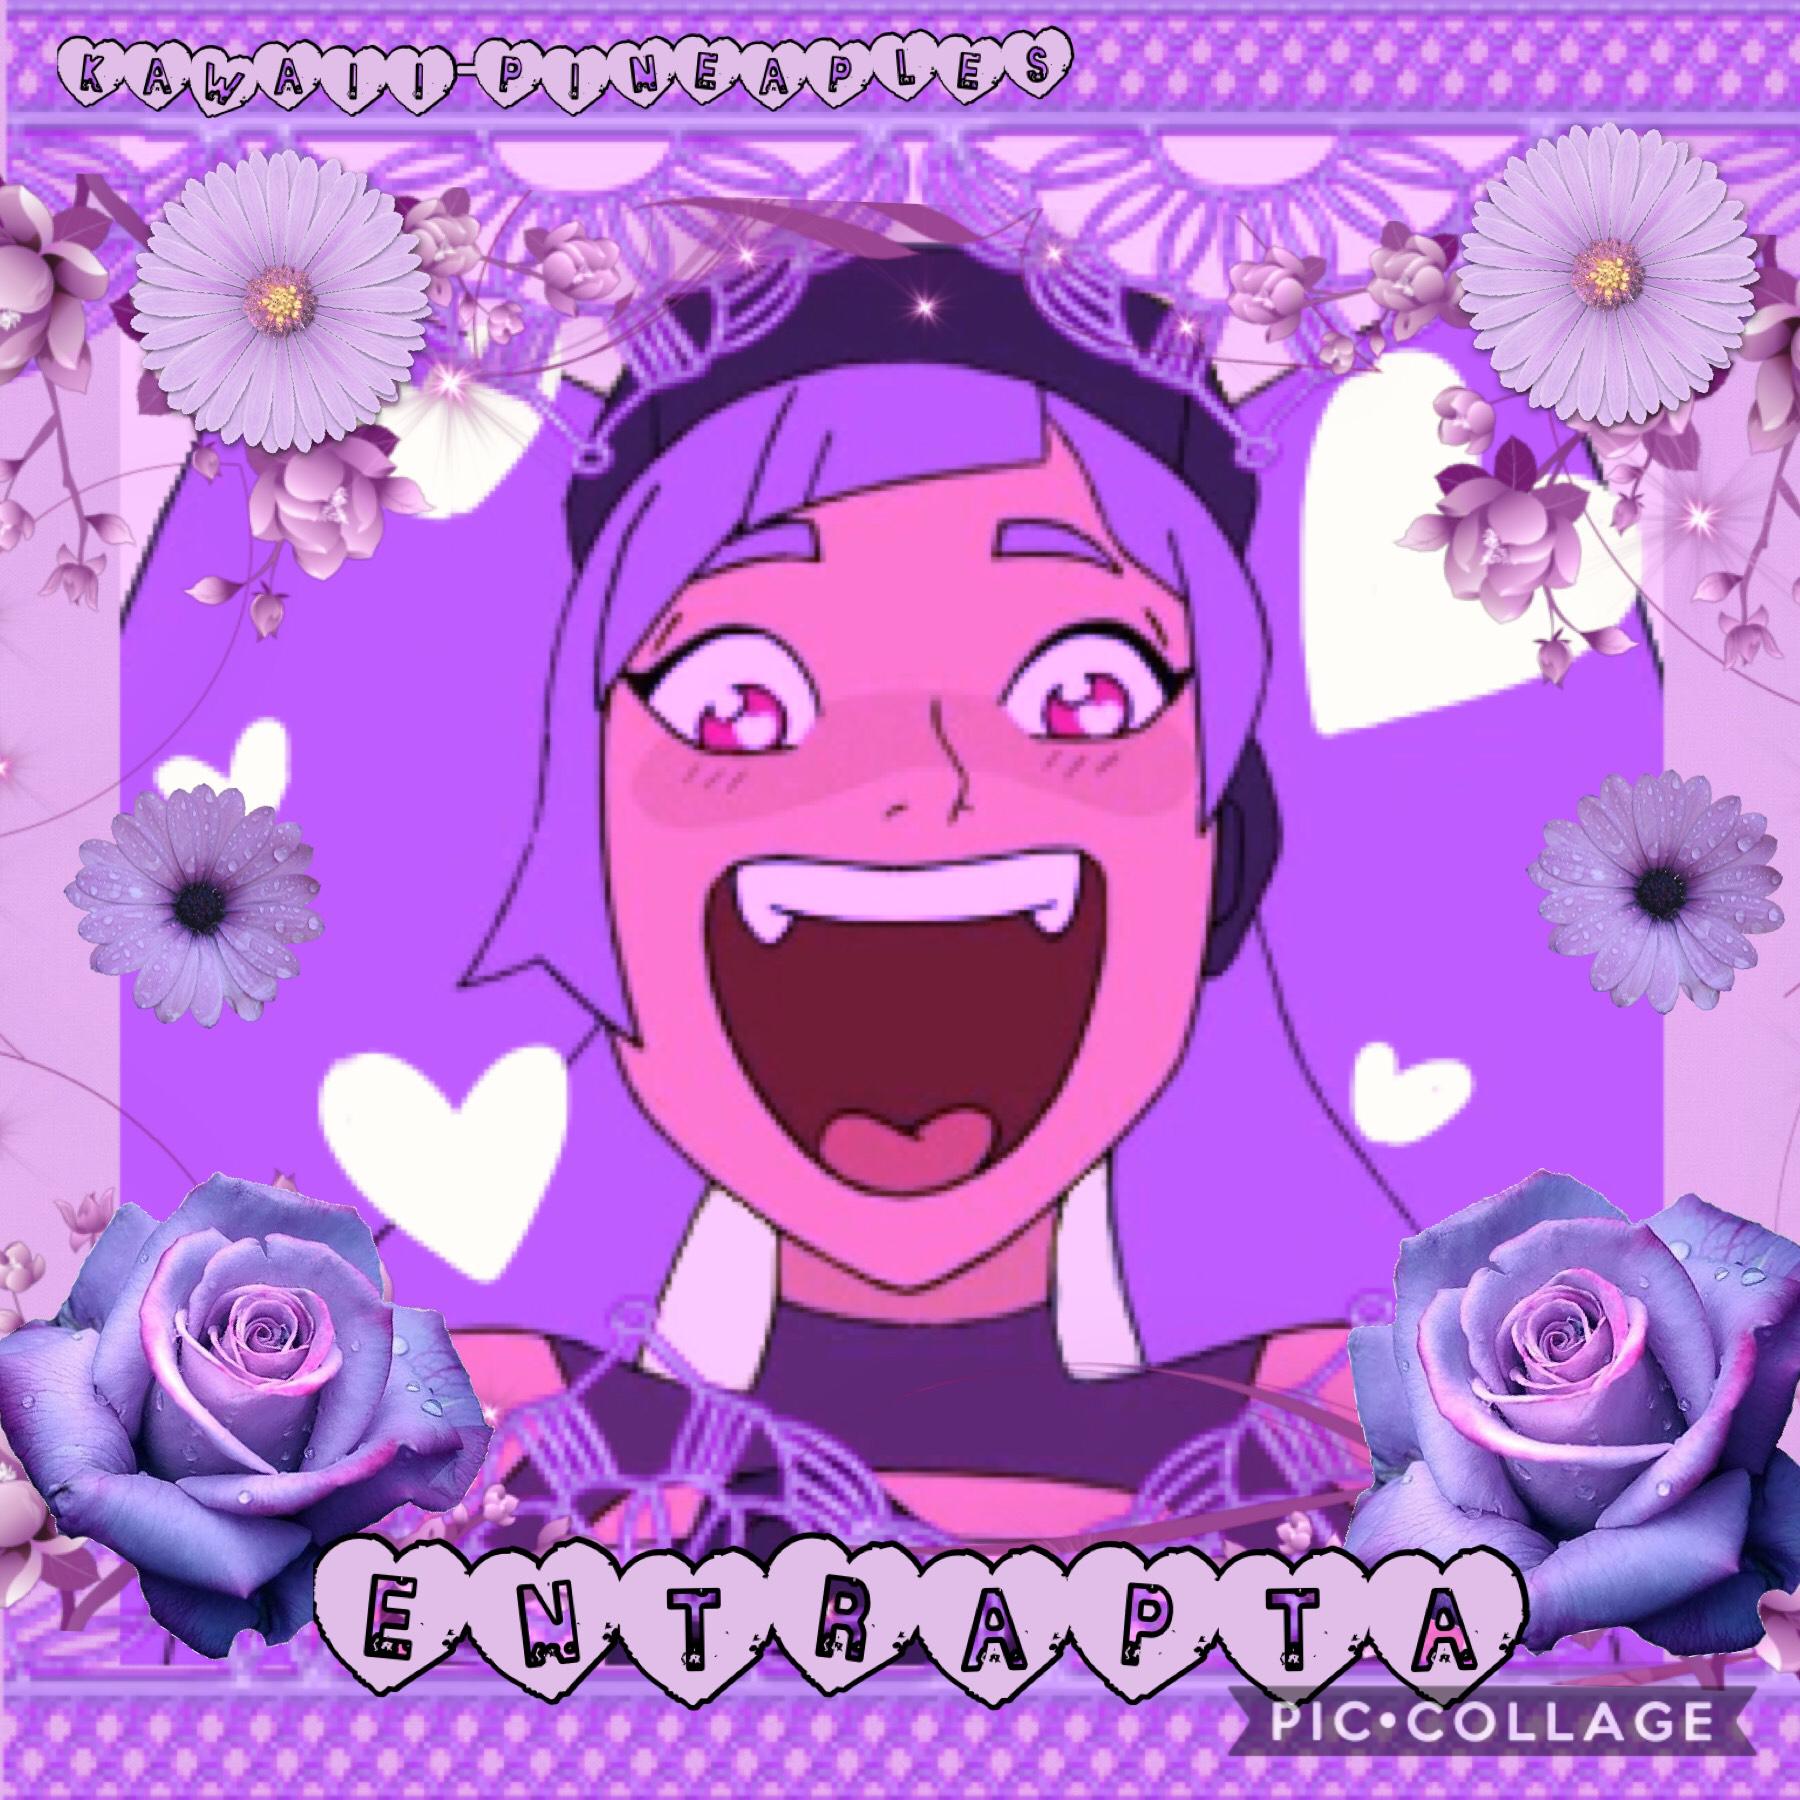 I LOVE THE NEW SHE-RA, Entrapta is best girl, can’t convince me otherwise